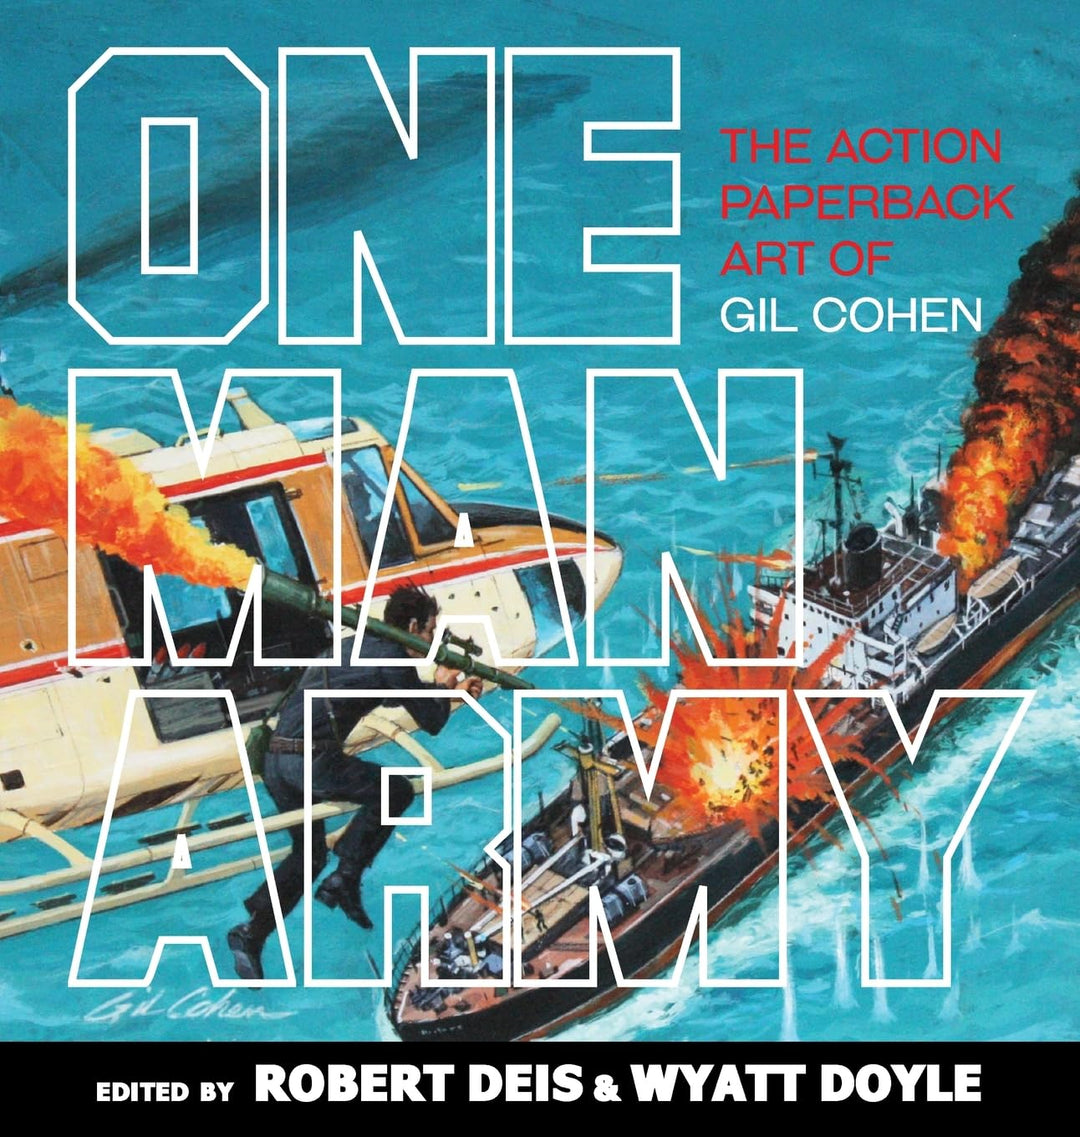 One Man Army: The Action Paperback Art of Gil Cohen (Men's Adventure Library)